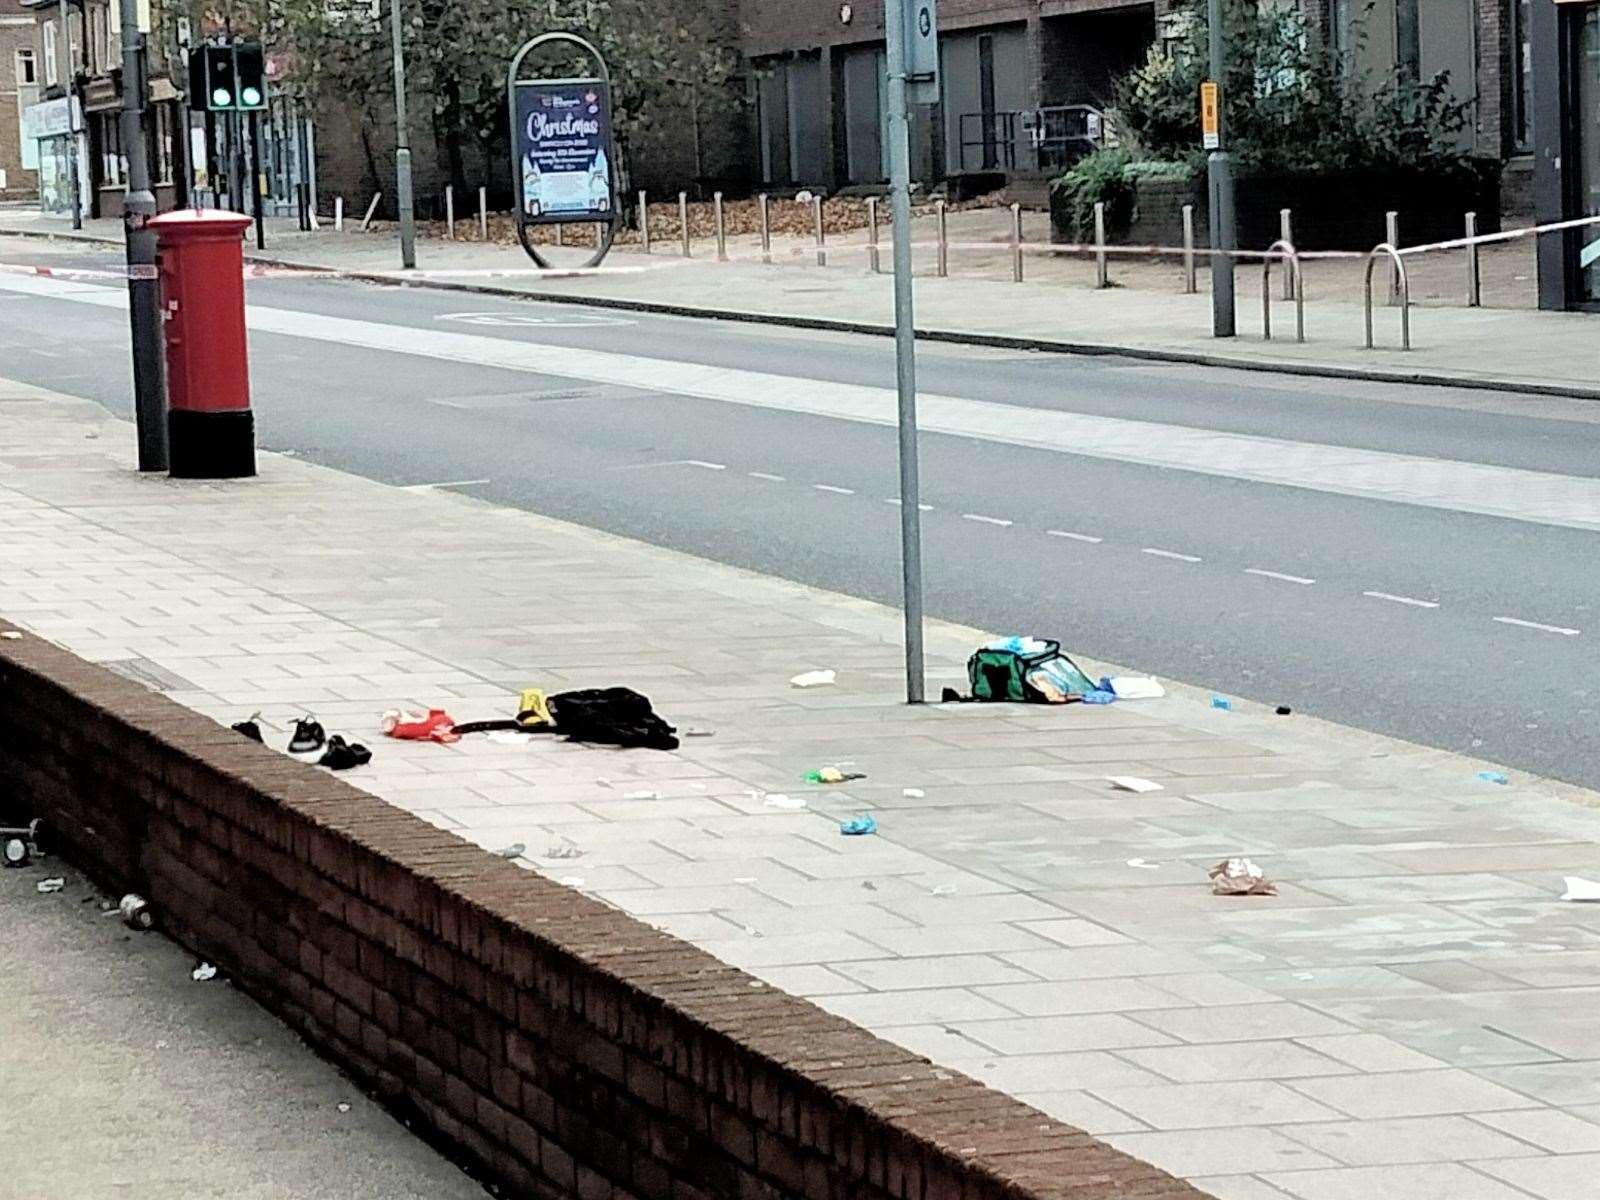 A medical bag and discarded clothes have been left on the pavement